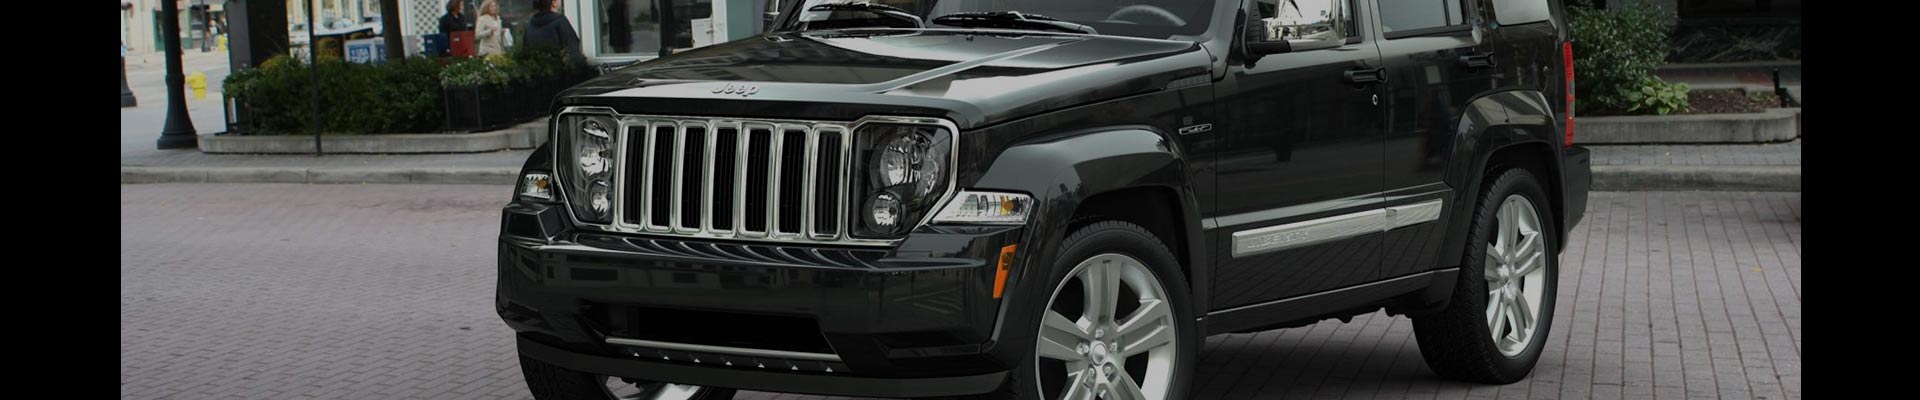 Shop Replacement and OEM 2008 Jeep Liberty Parts with Discounted Price on the Net